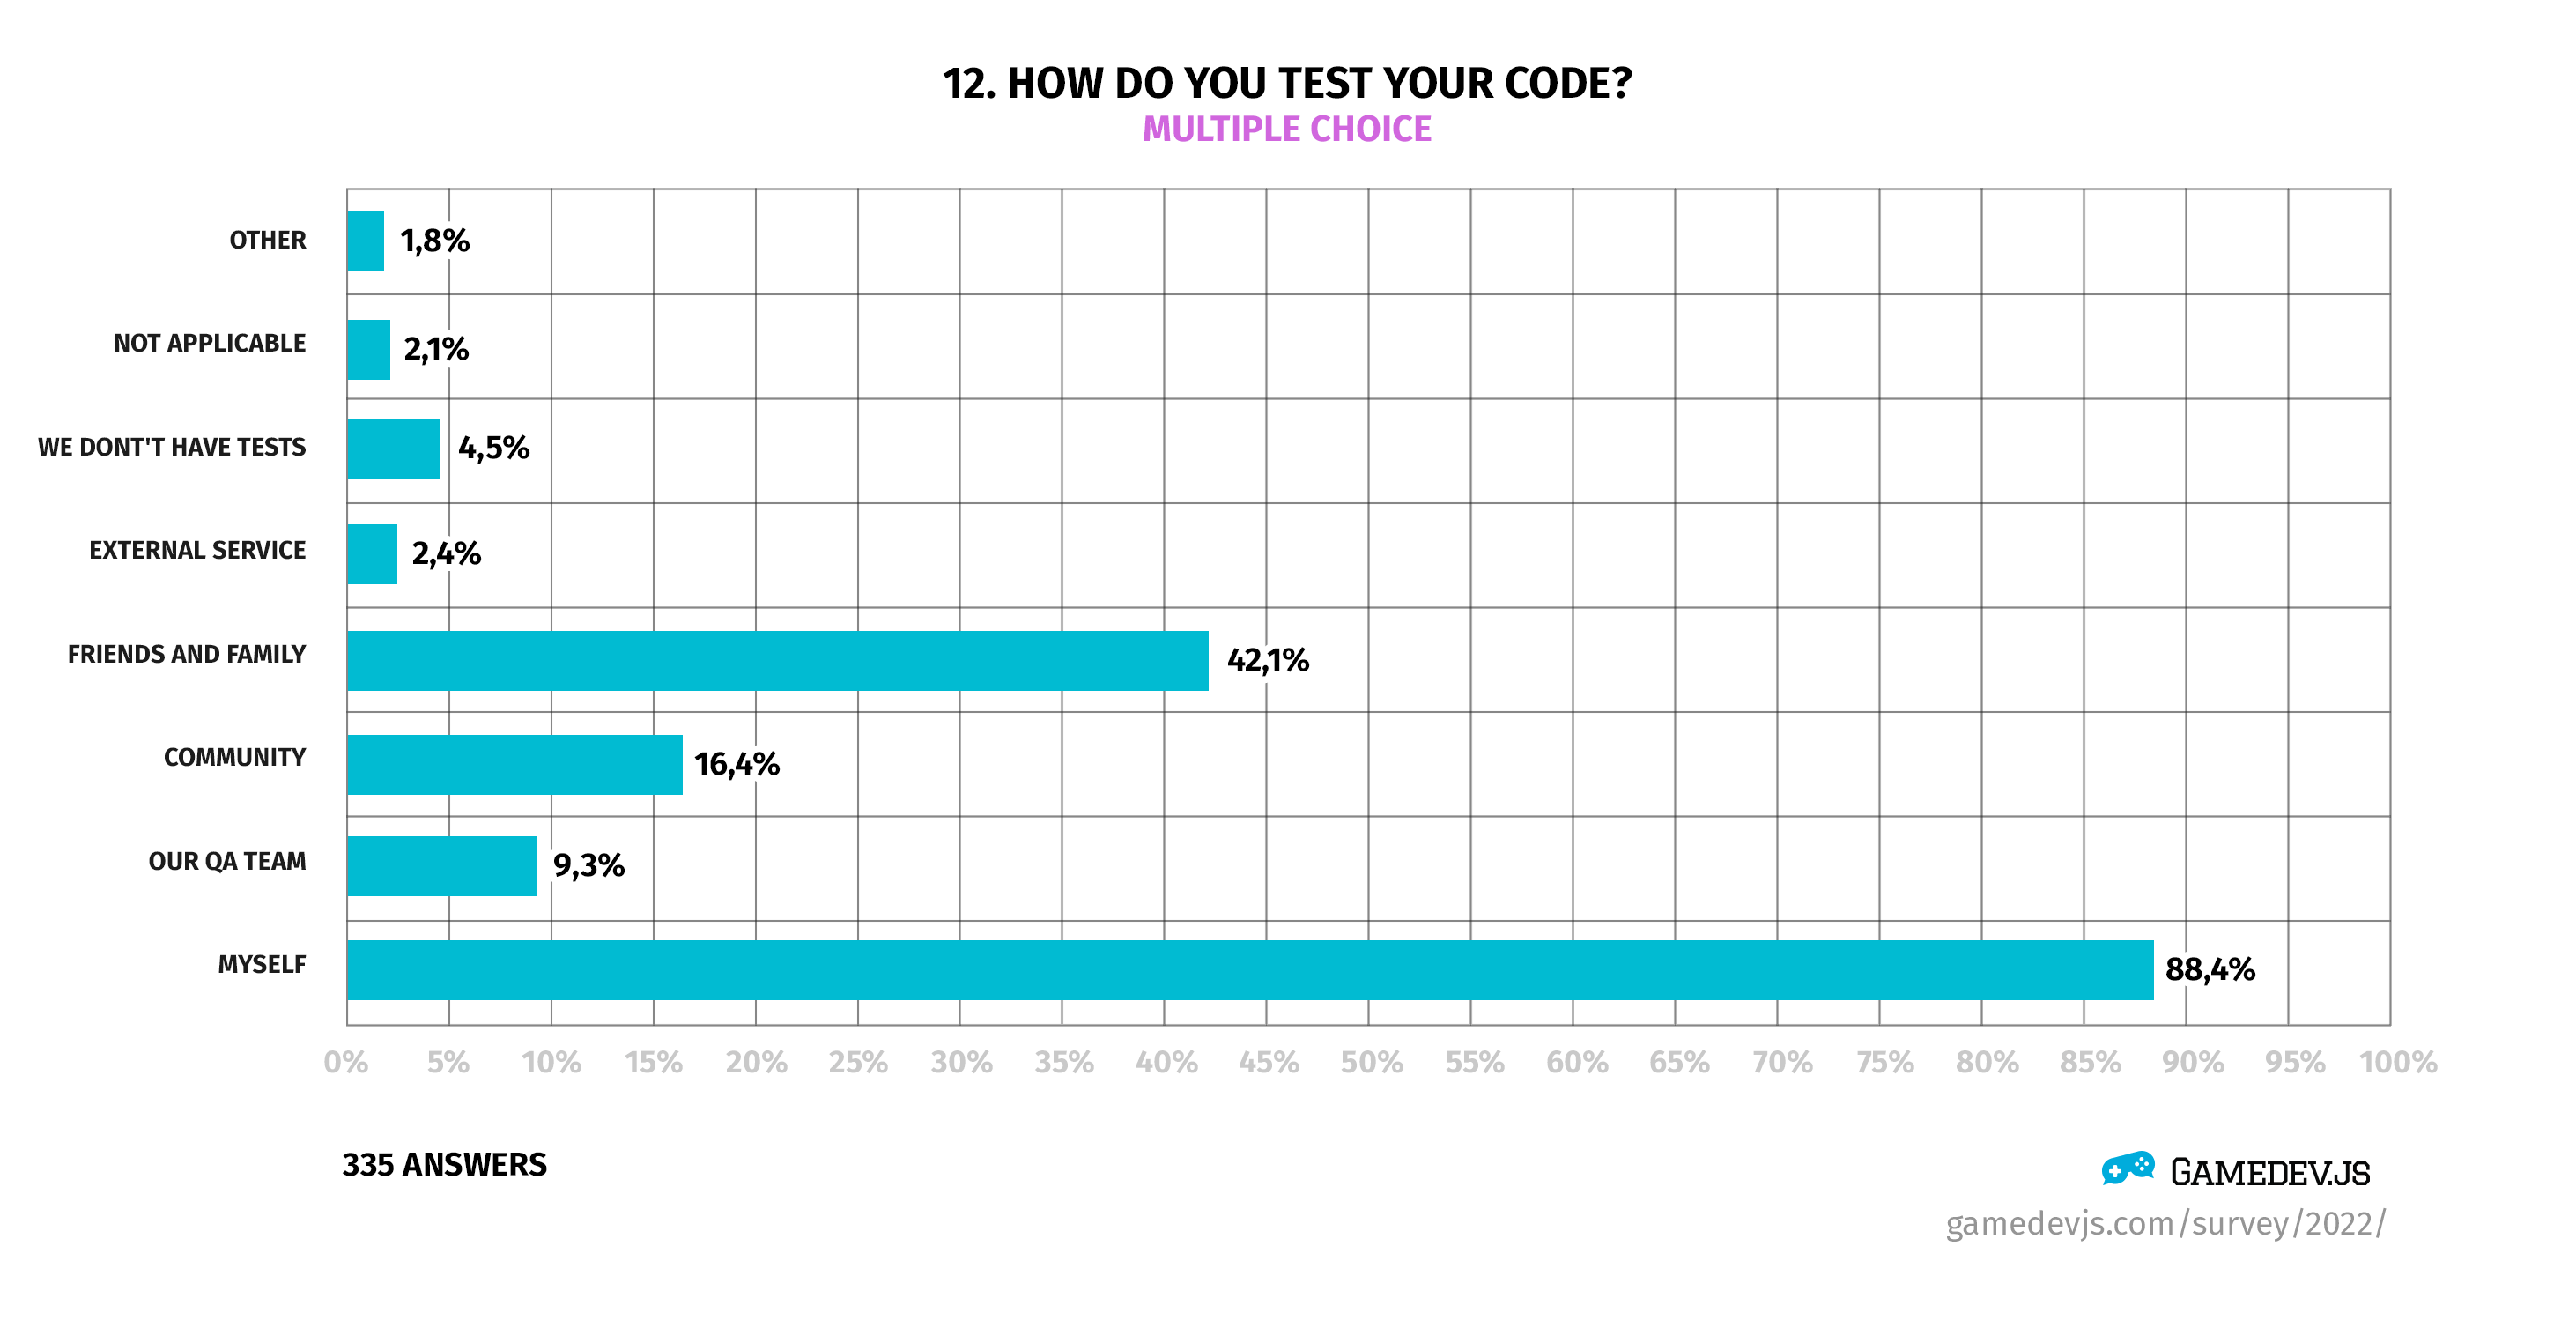 Gamedev.js Survey 2022 - Question #12: How do you test your code?